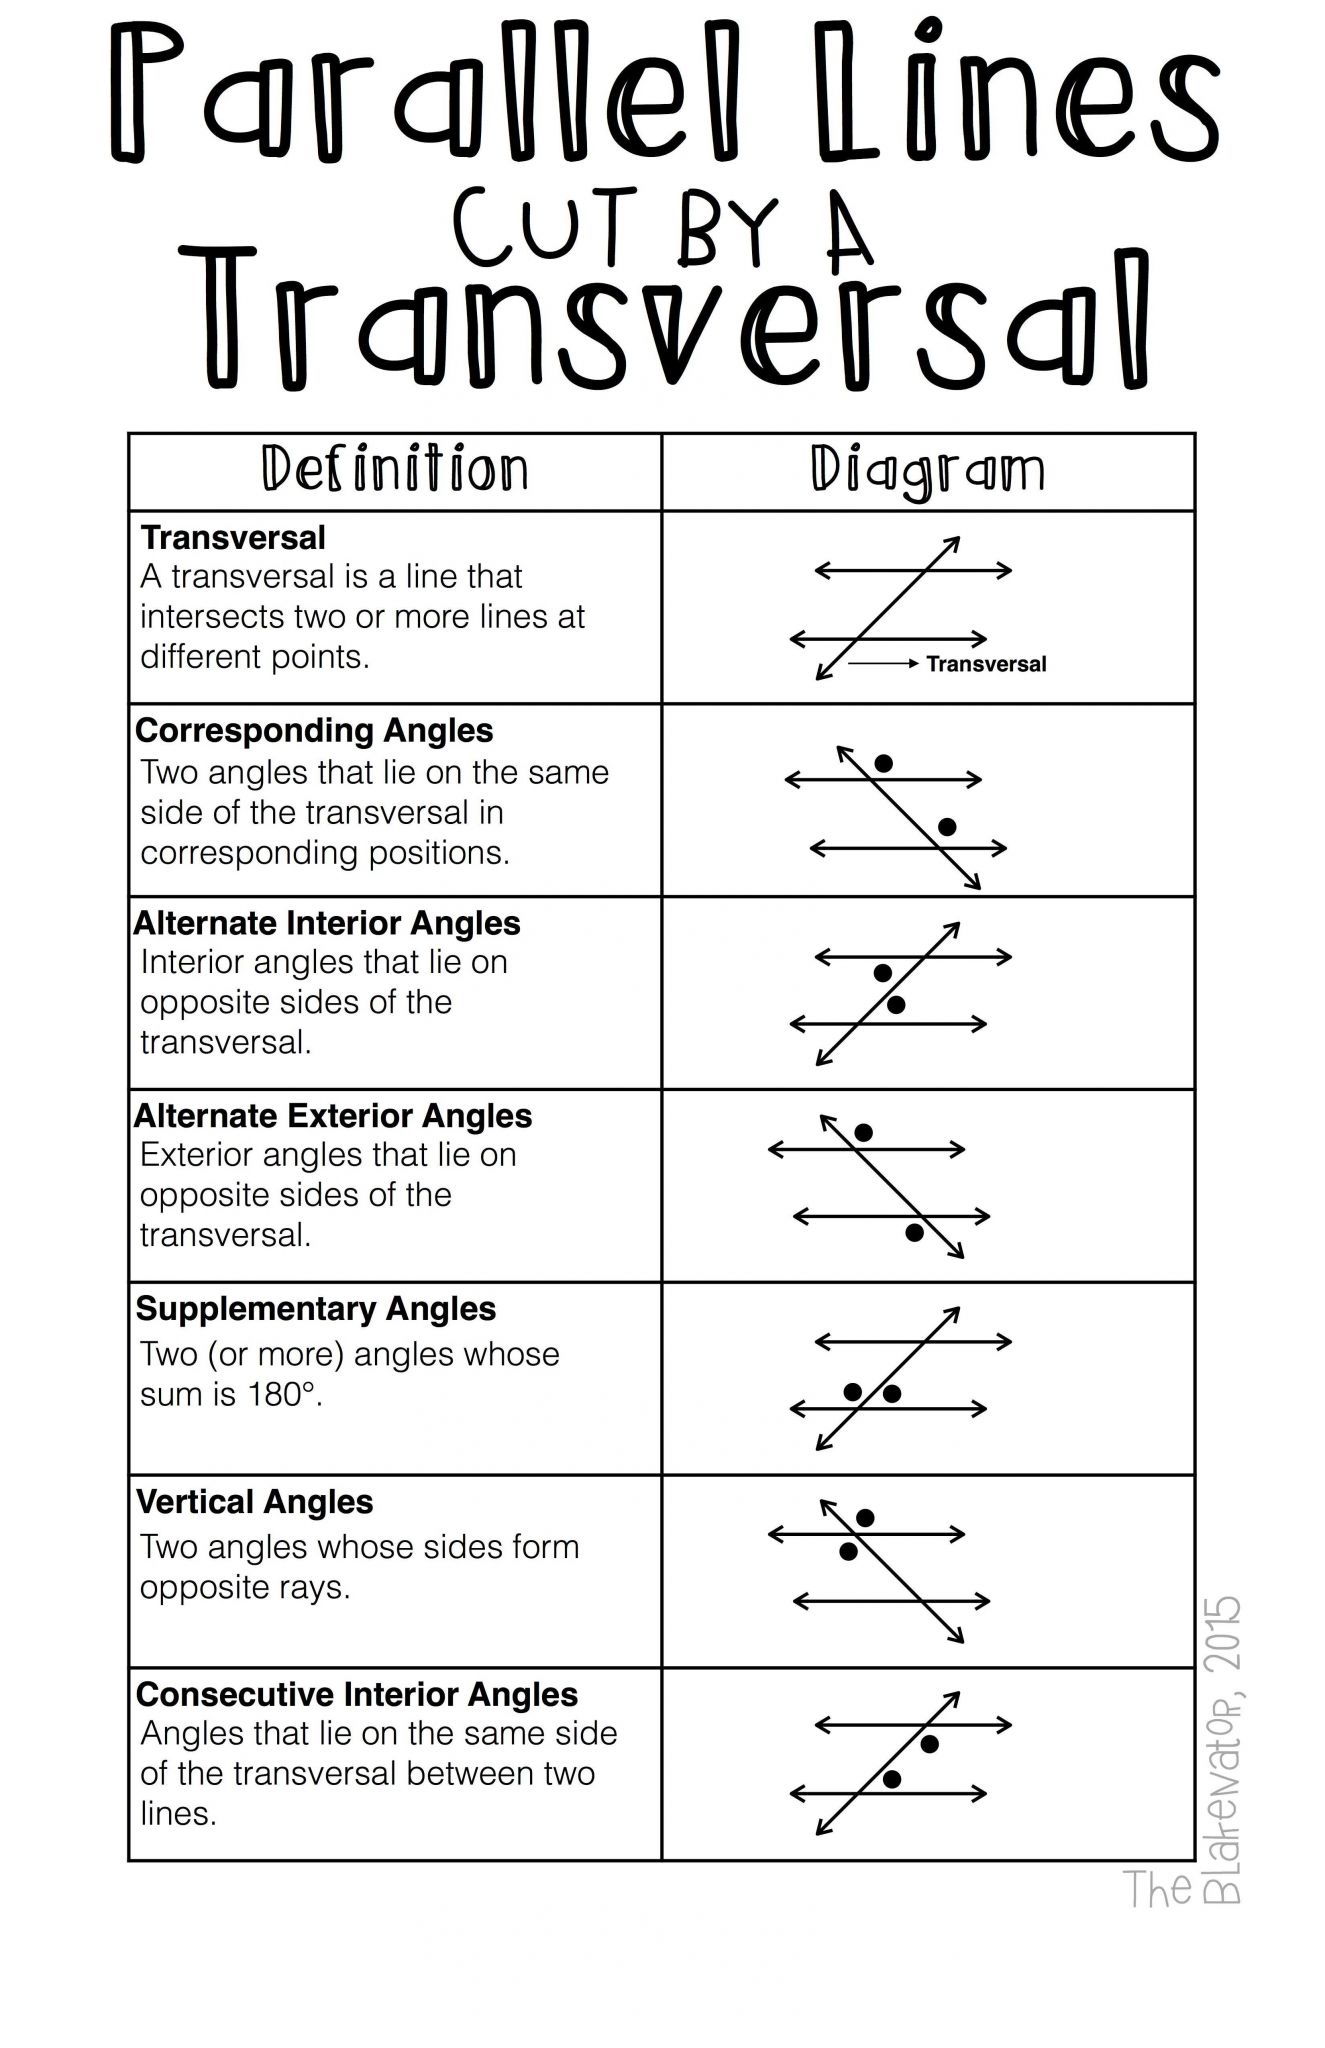 Right Triangle Word Problems Worksheet as Well as Free Download Increase Math Literacy In Your Classroom Properties